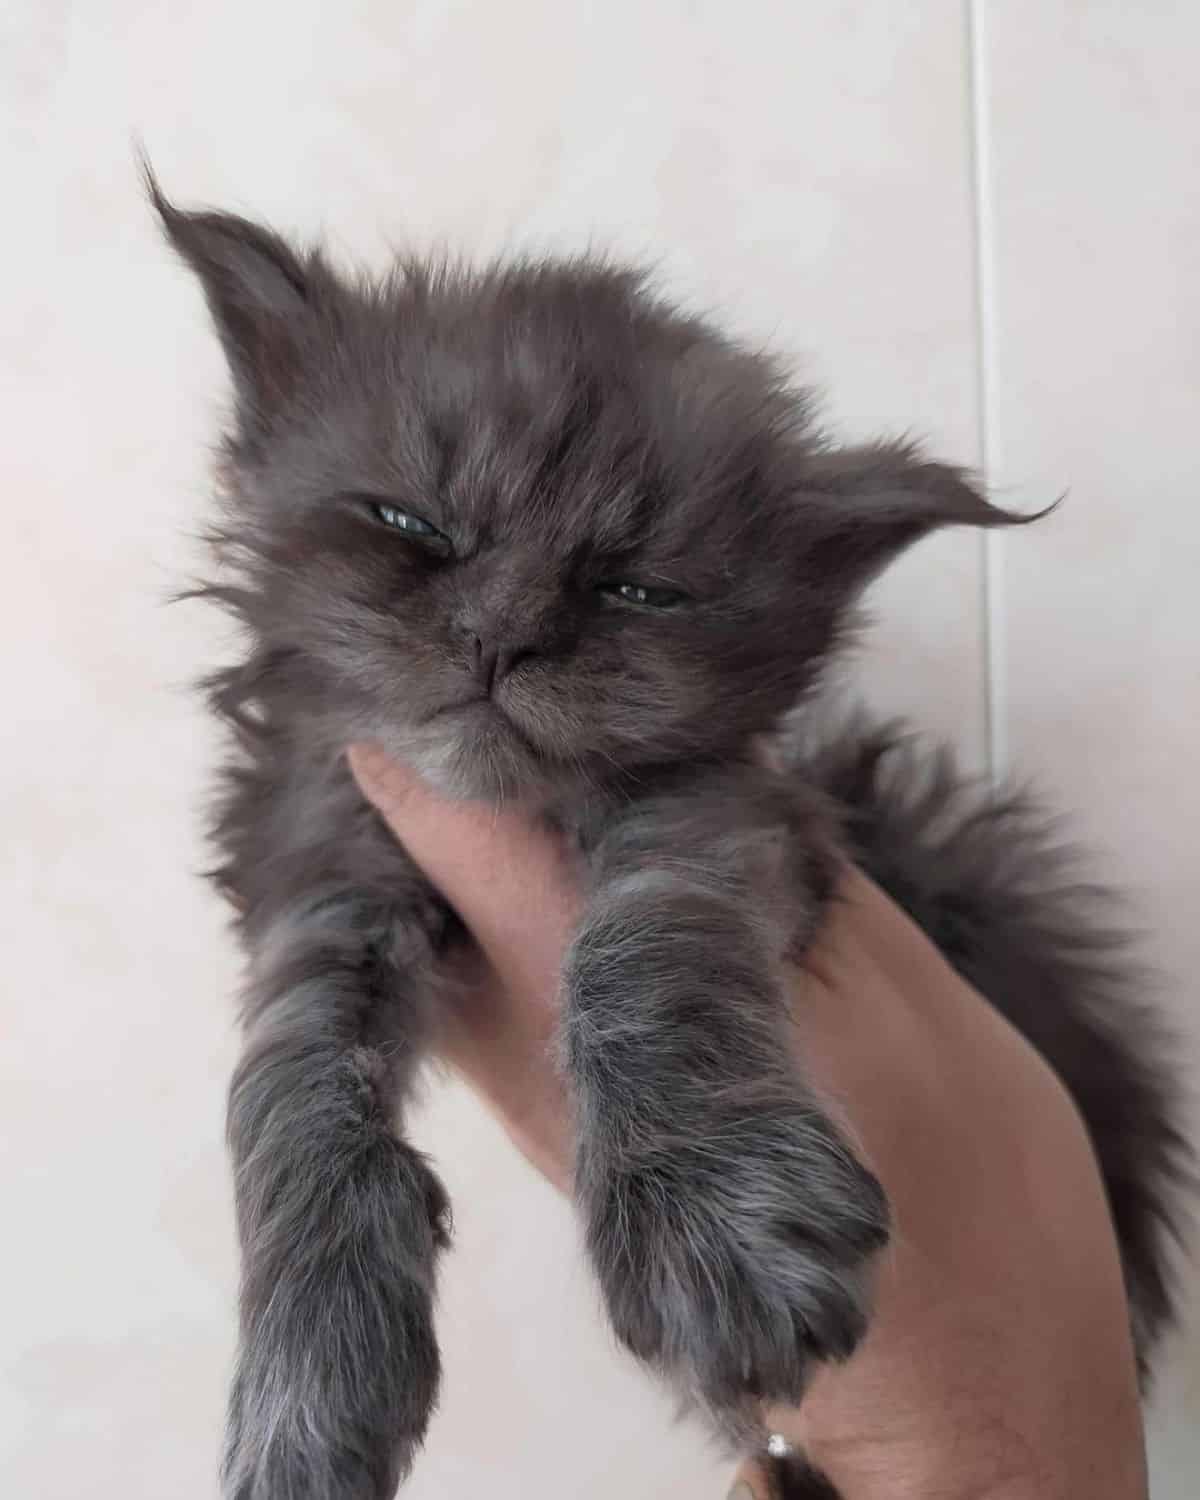 A tiny fluffy gra maine coon kitten held by hand.